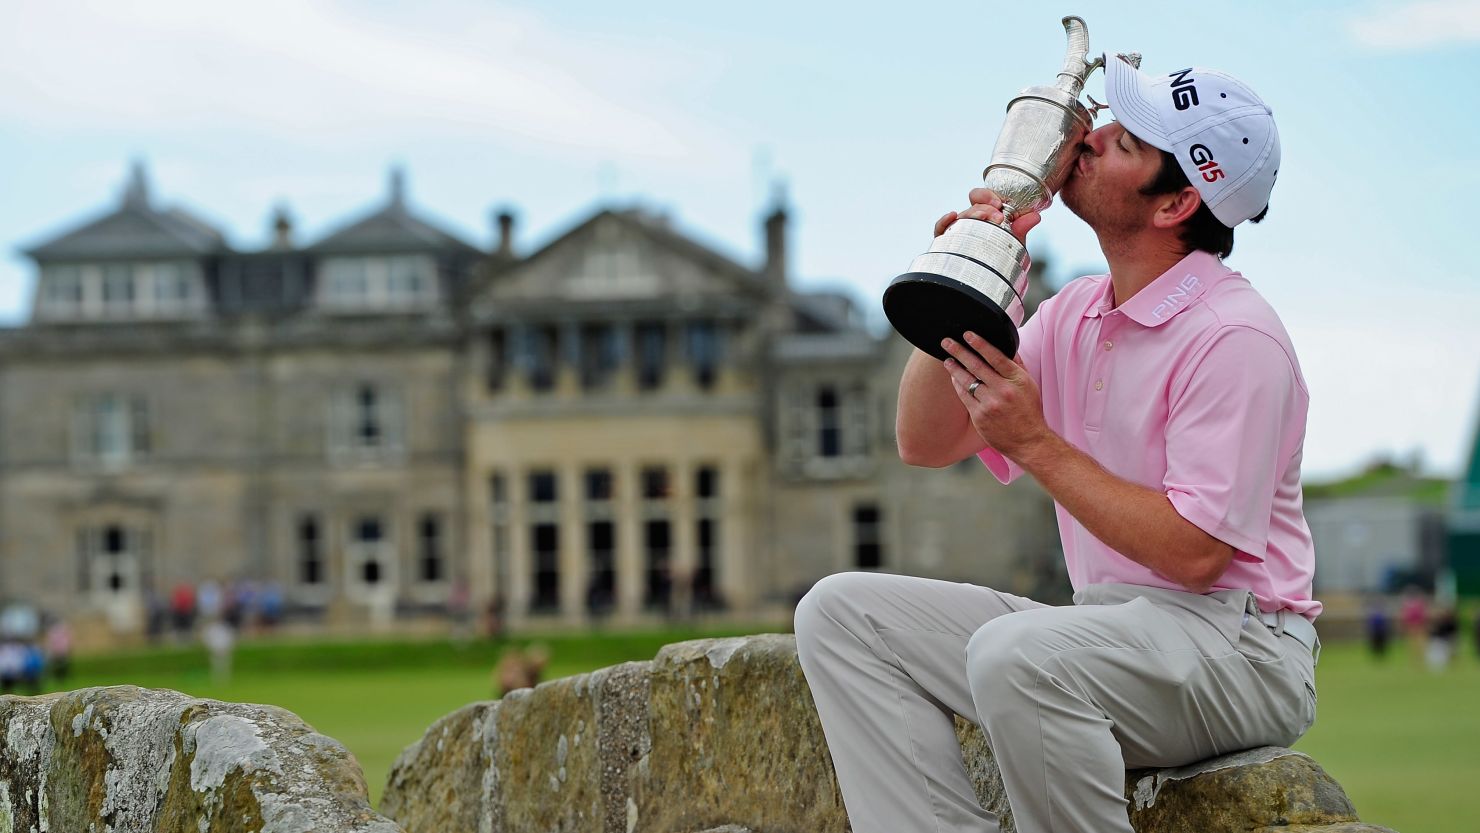 South Africa's Louis Oosthuizen won the first major of his career at the Old Course in 2010.